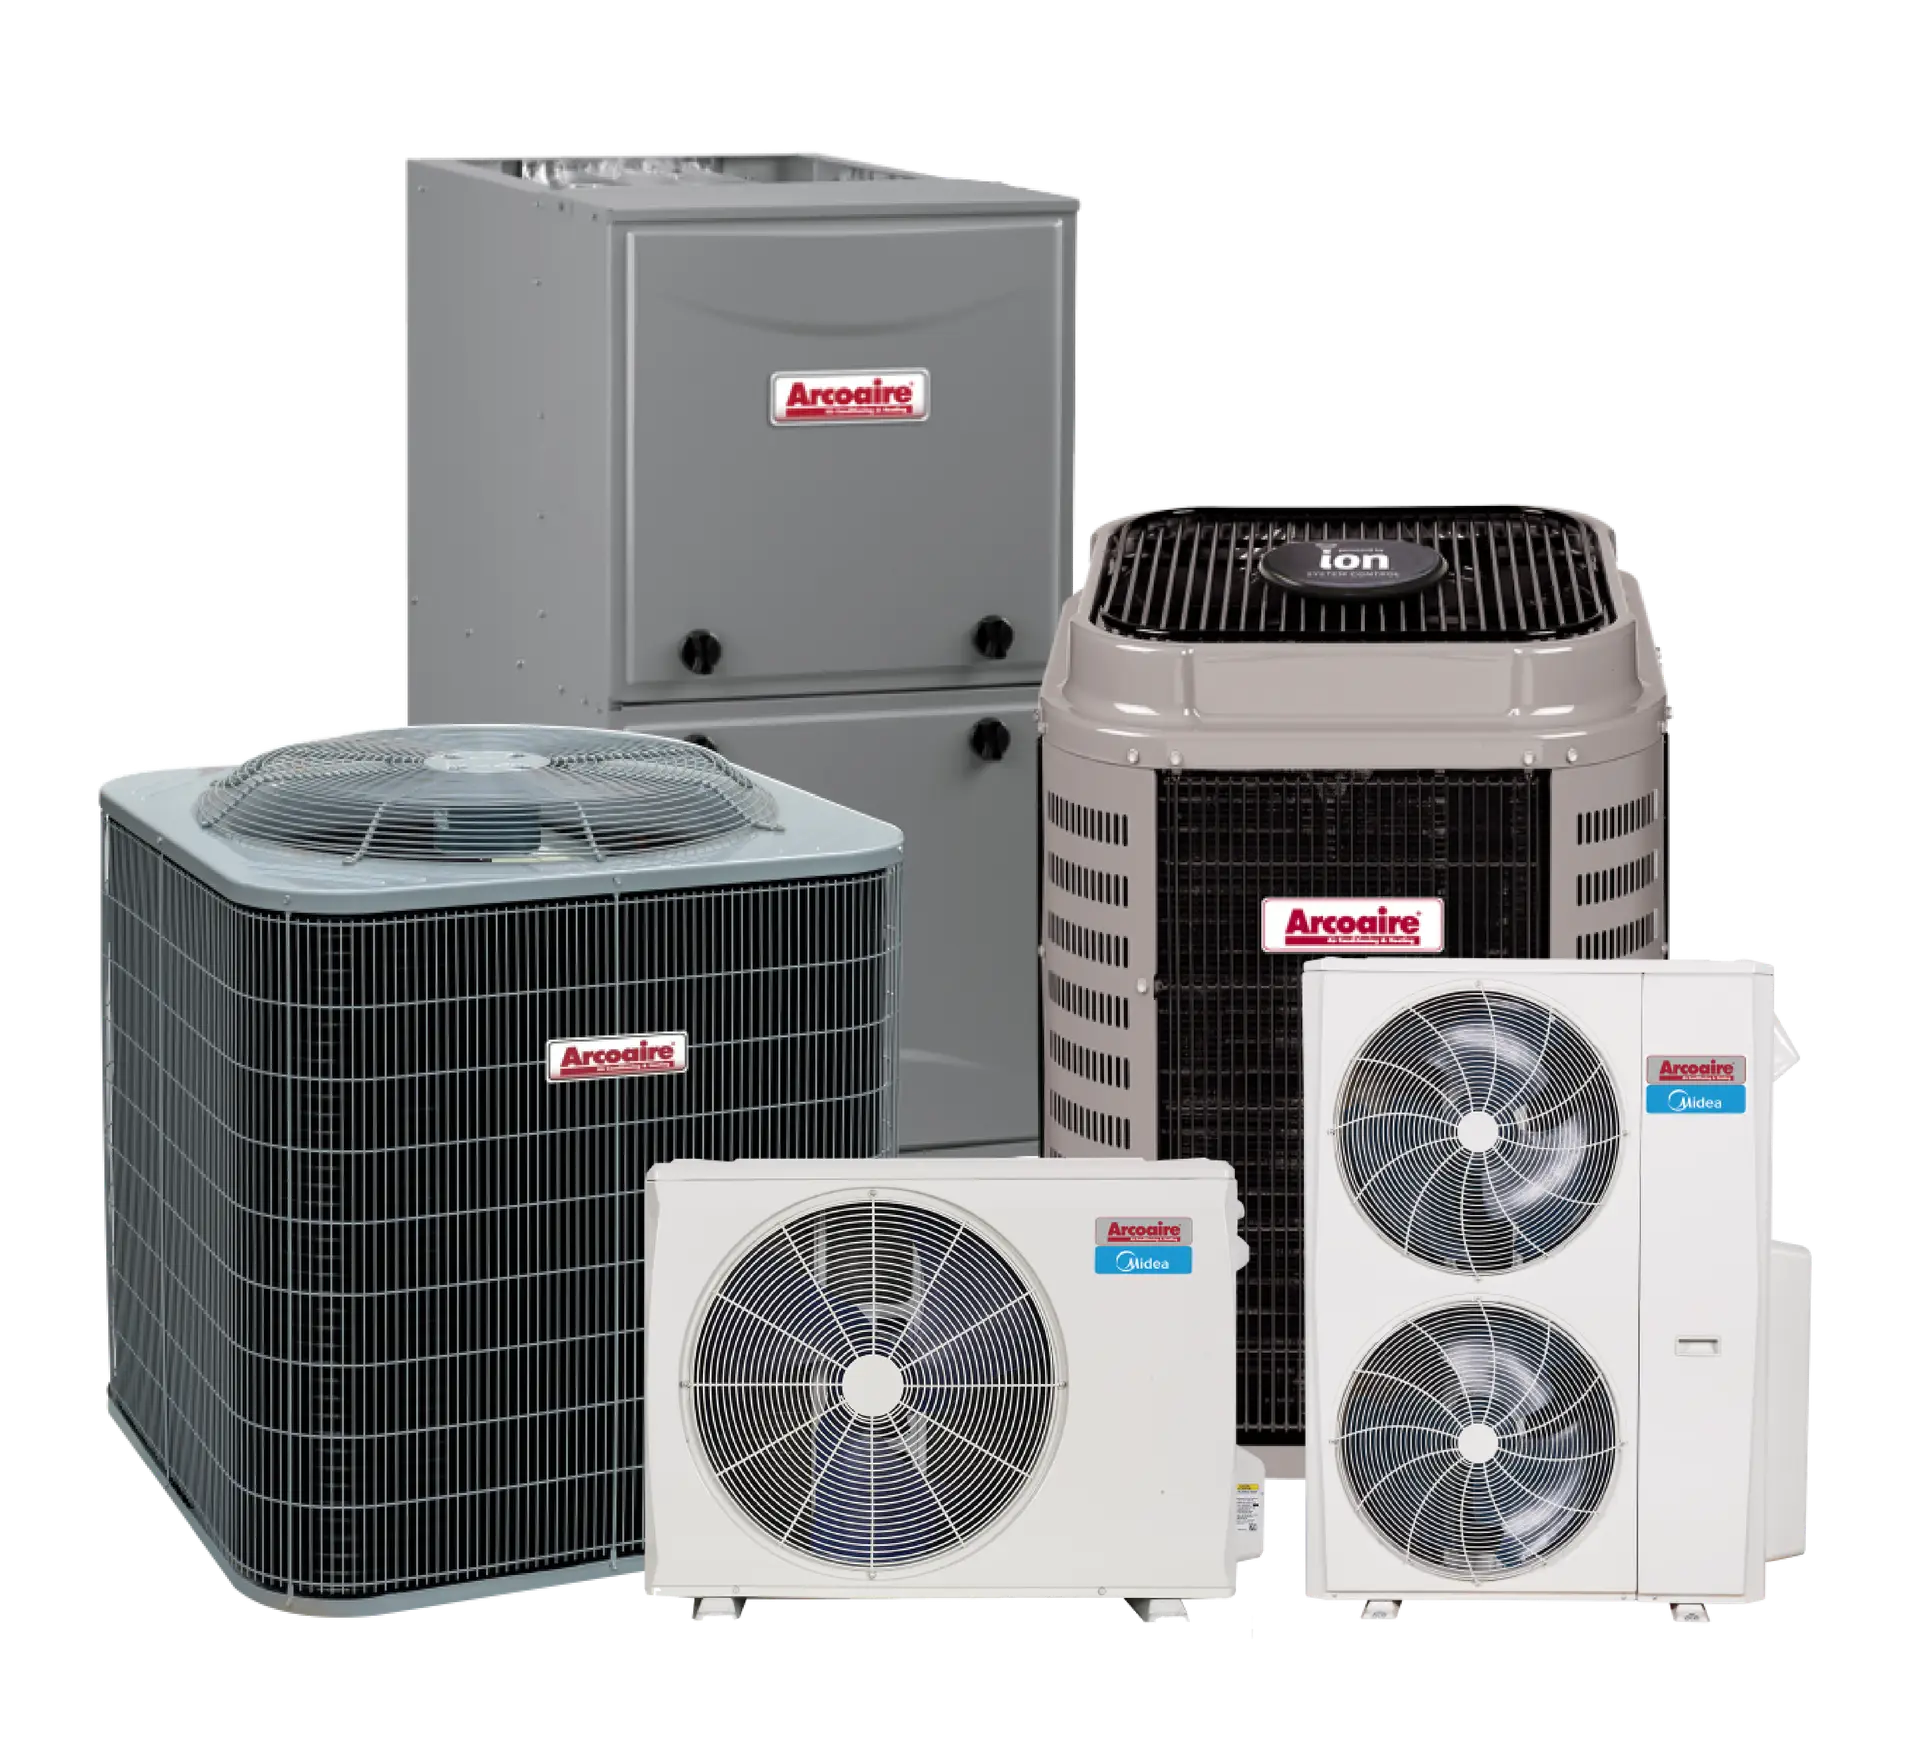 ICP, or International Comfort Products, stands as a respected and reliable brand in the HVAC industry. With a history spanning several decades, ICP has consistently delivered HVAC units known for their efficiency, affordability, and durability.